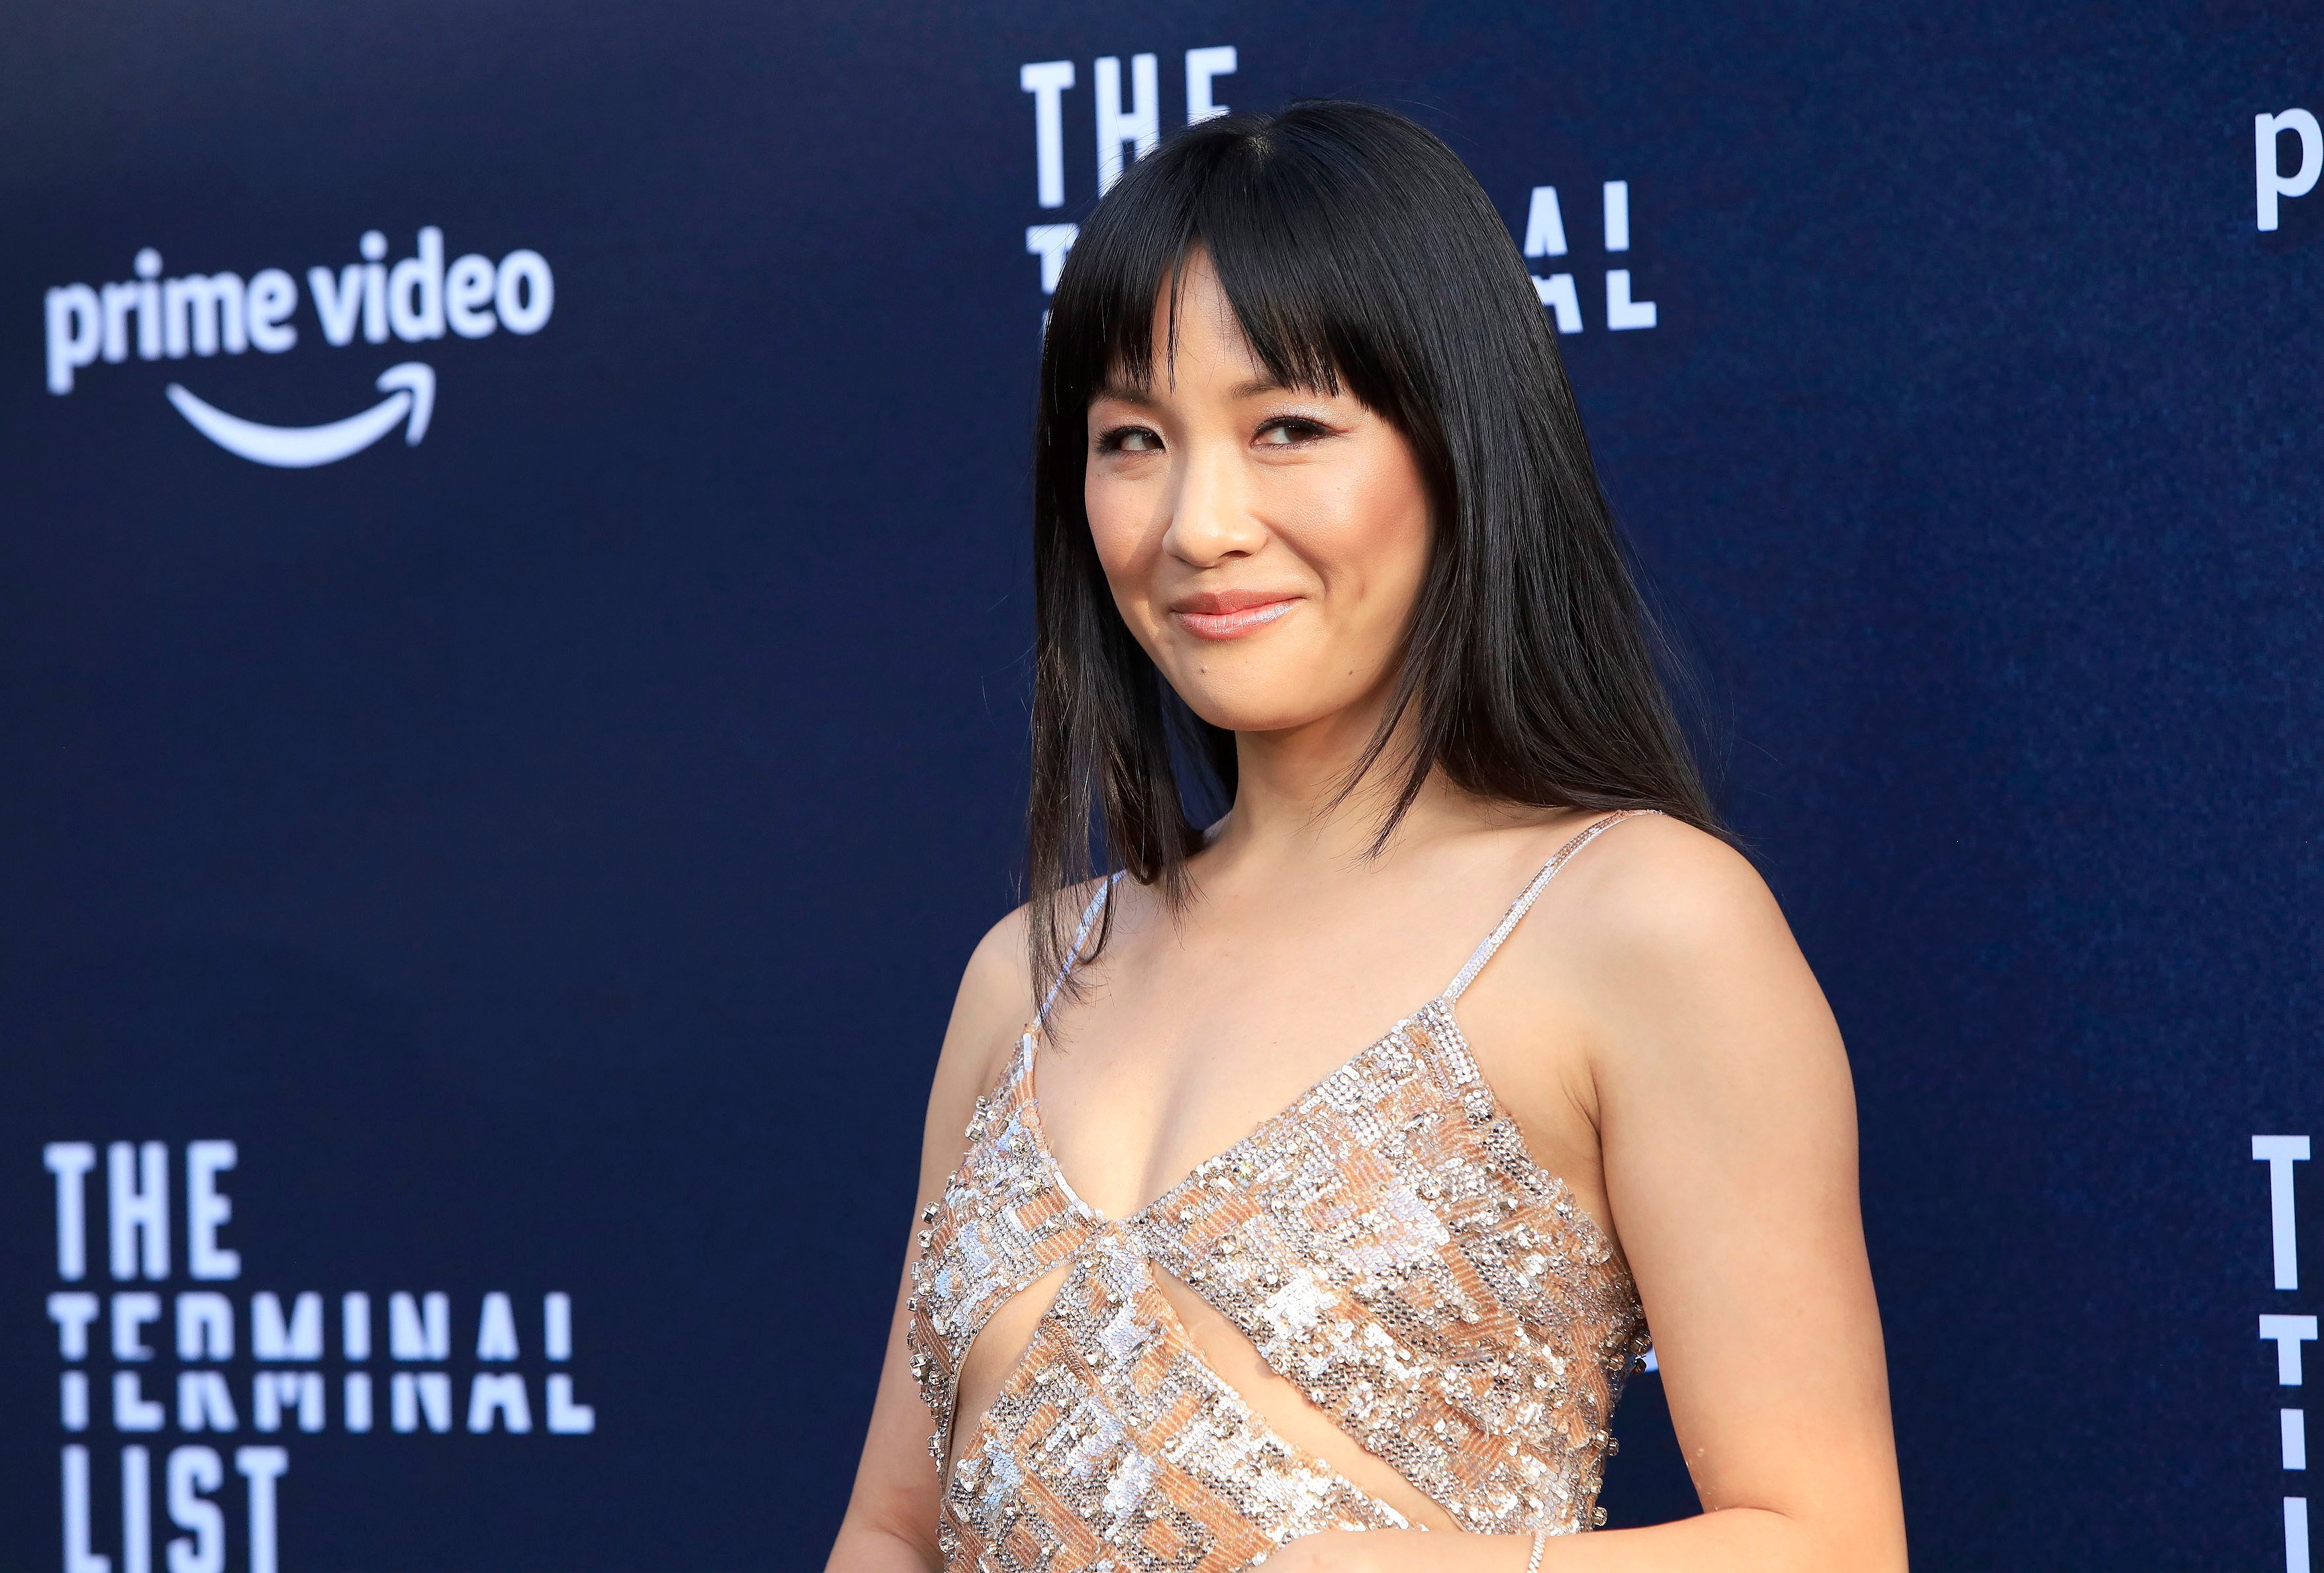 Actress Constance Wu arrives at the premiere of “The Terminal List” in Los Angeles in June. Photo: EPA-EFE